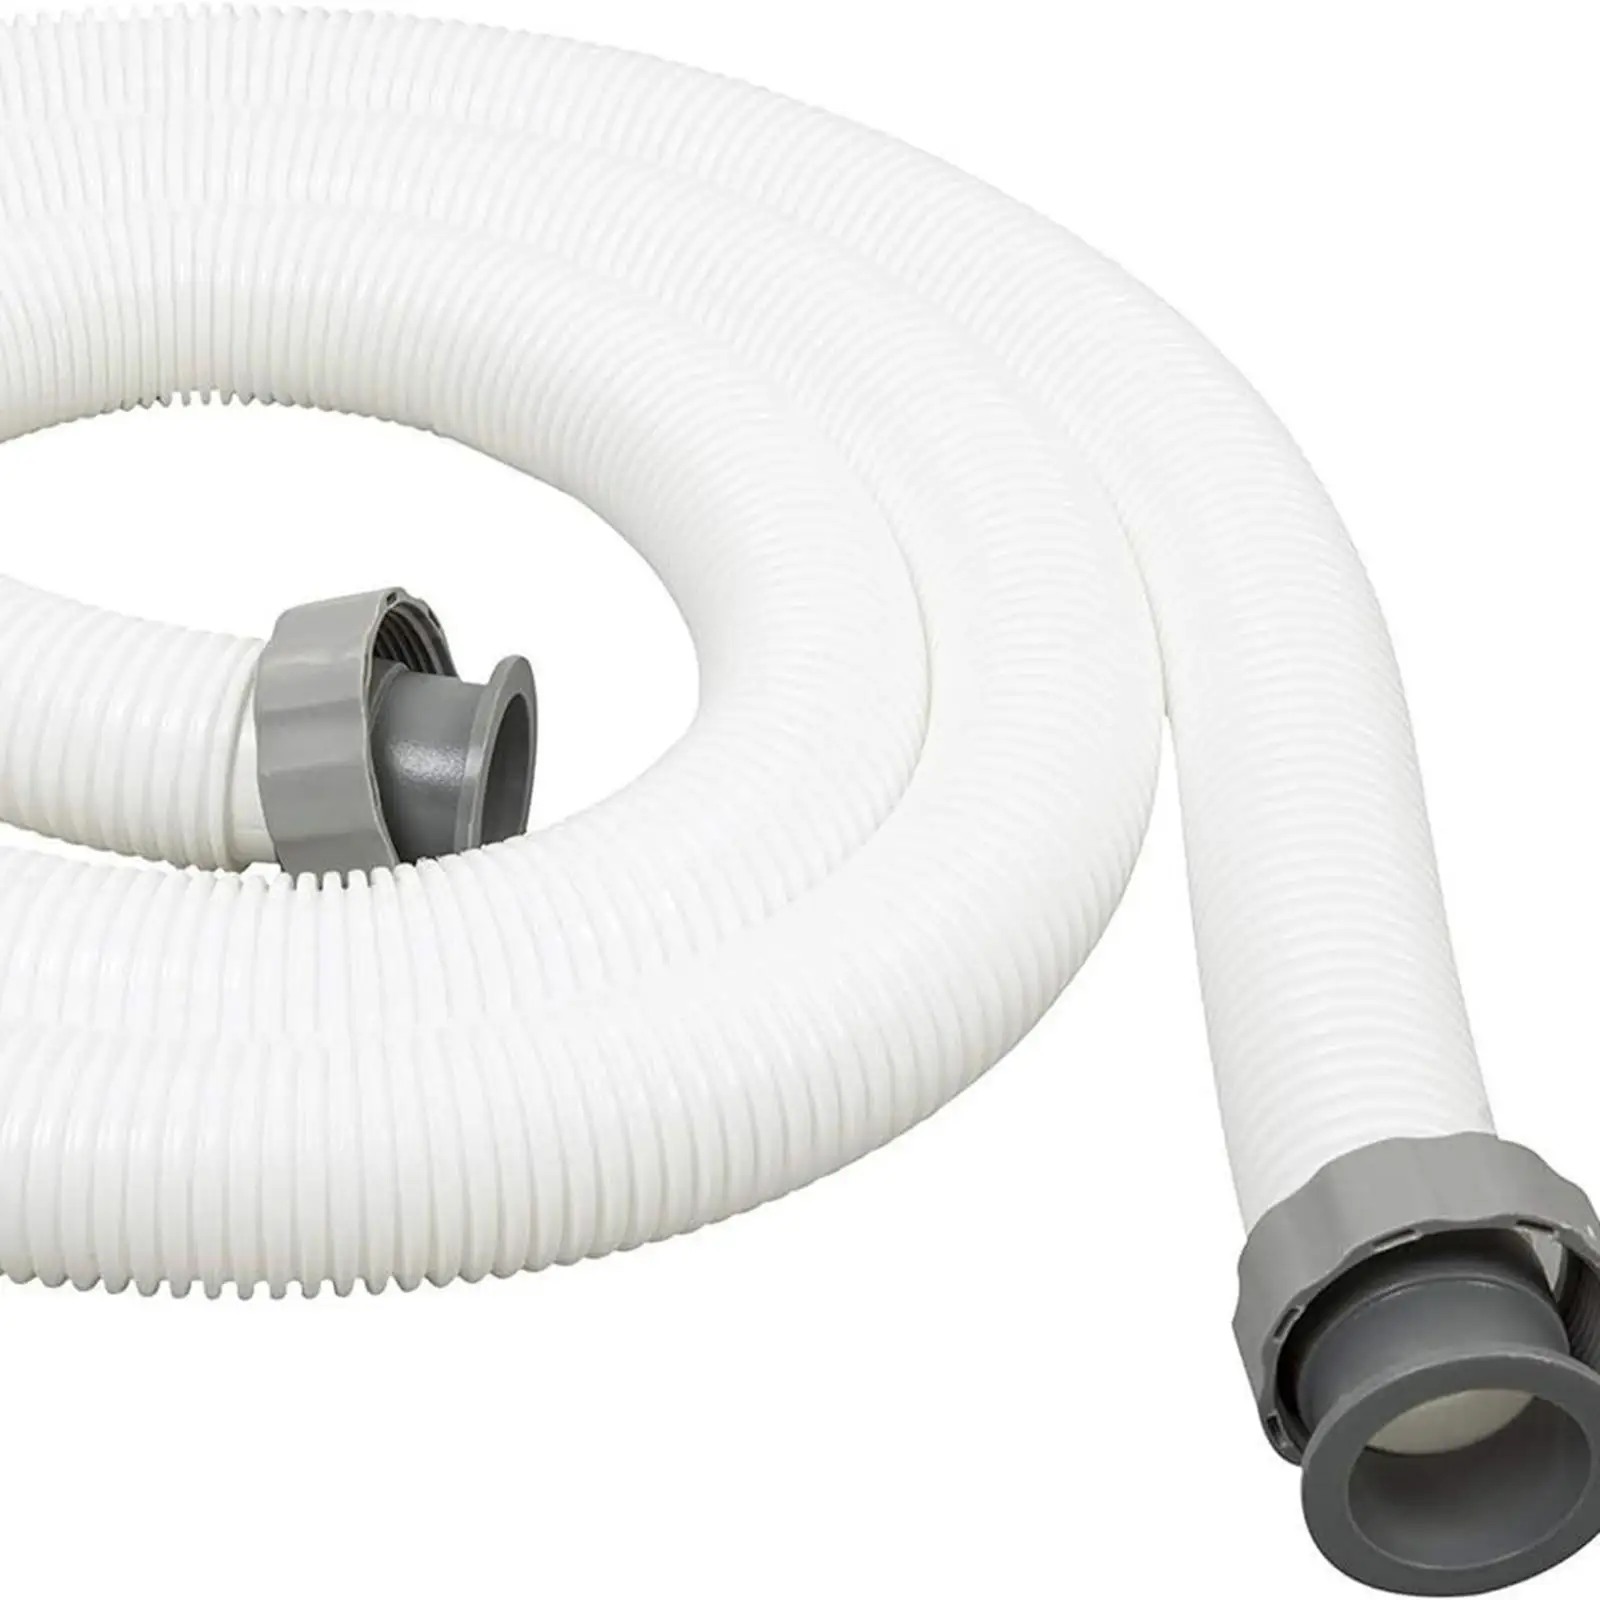 Swimming Pool Hose Flexible Pool Replacement Hose Replacement Part Leakproof Lightweight Pool Pump Hose 1.5M Long above Ground